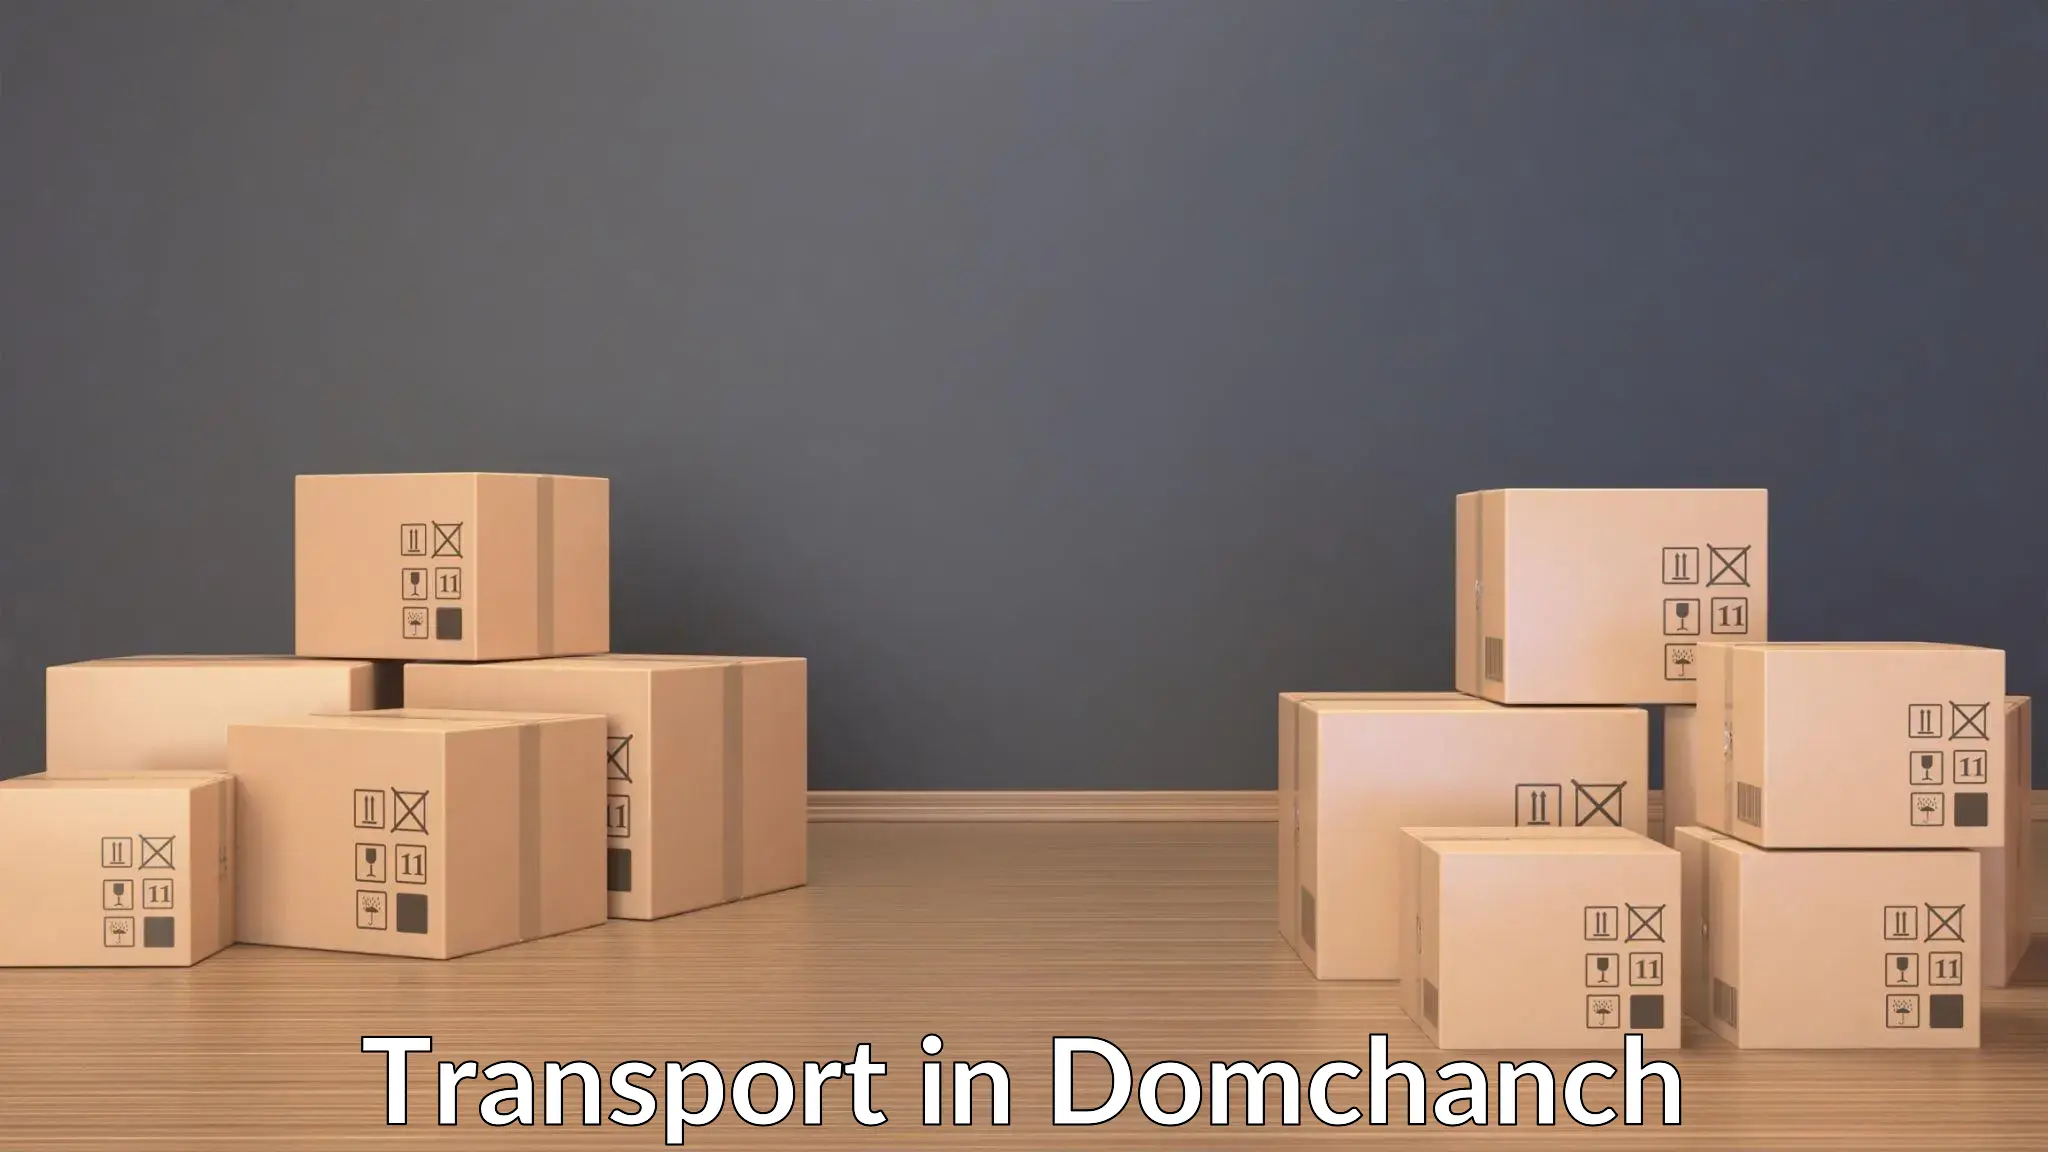 Vehicle transport services in Domchanch